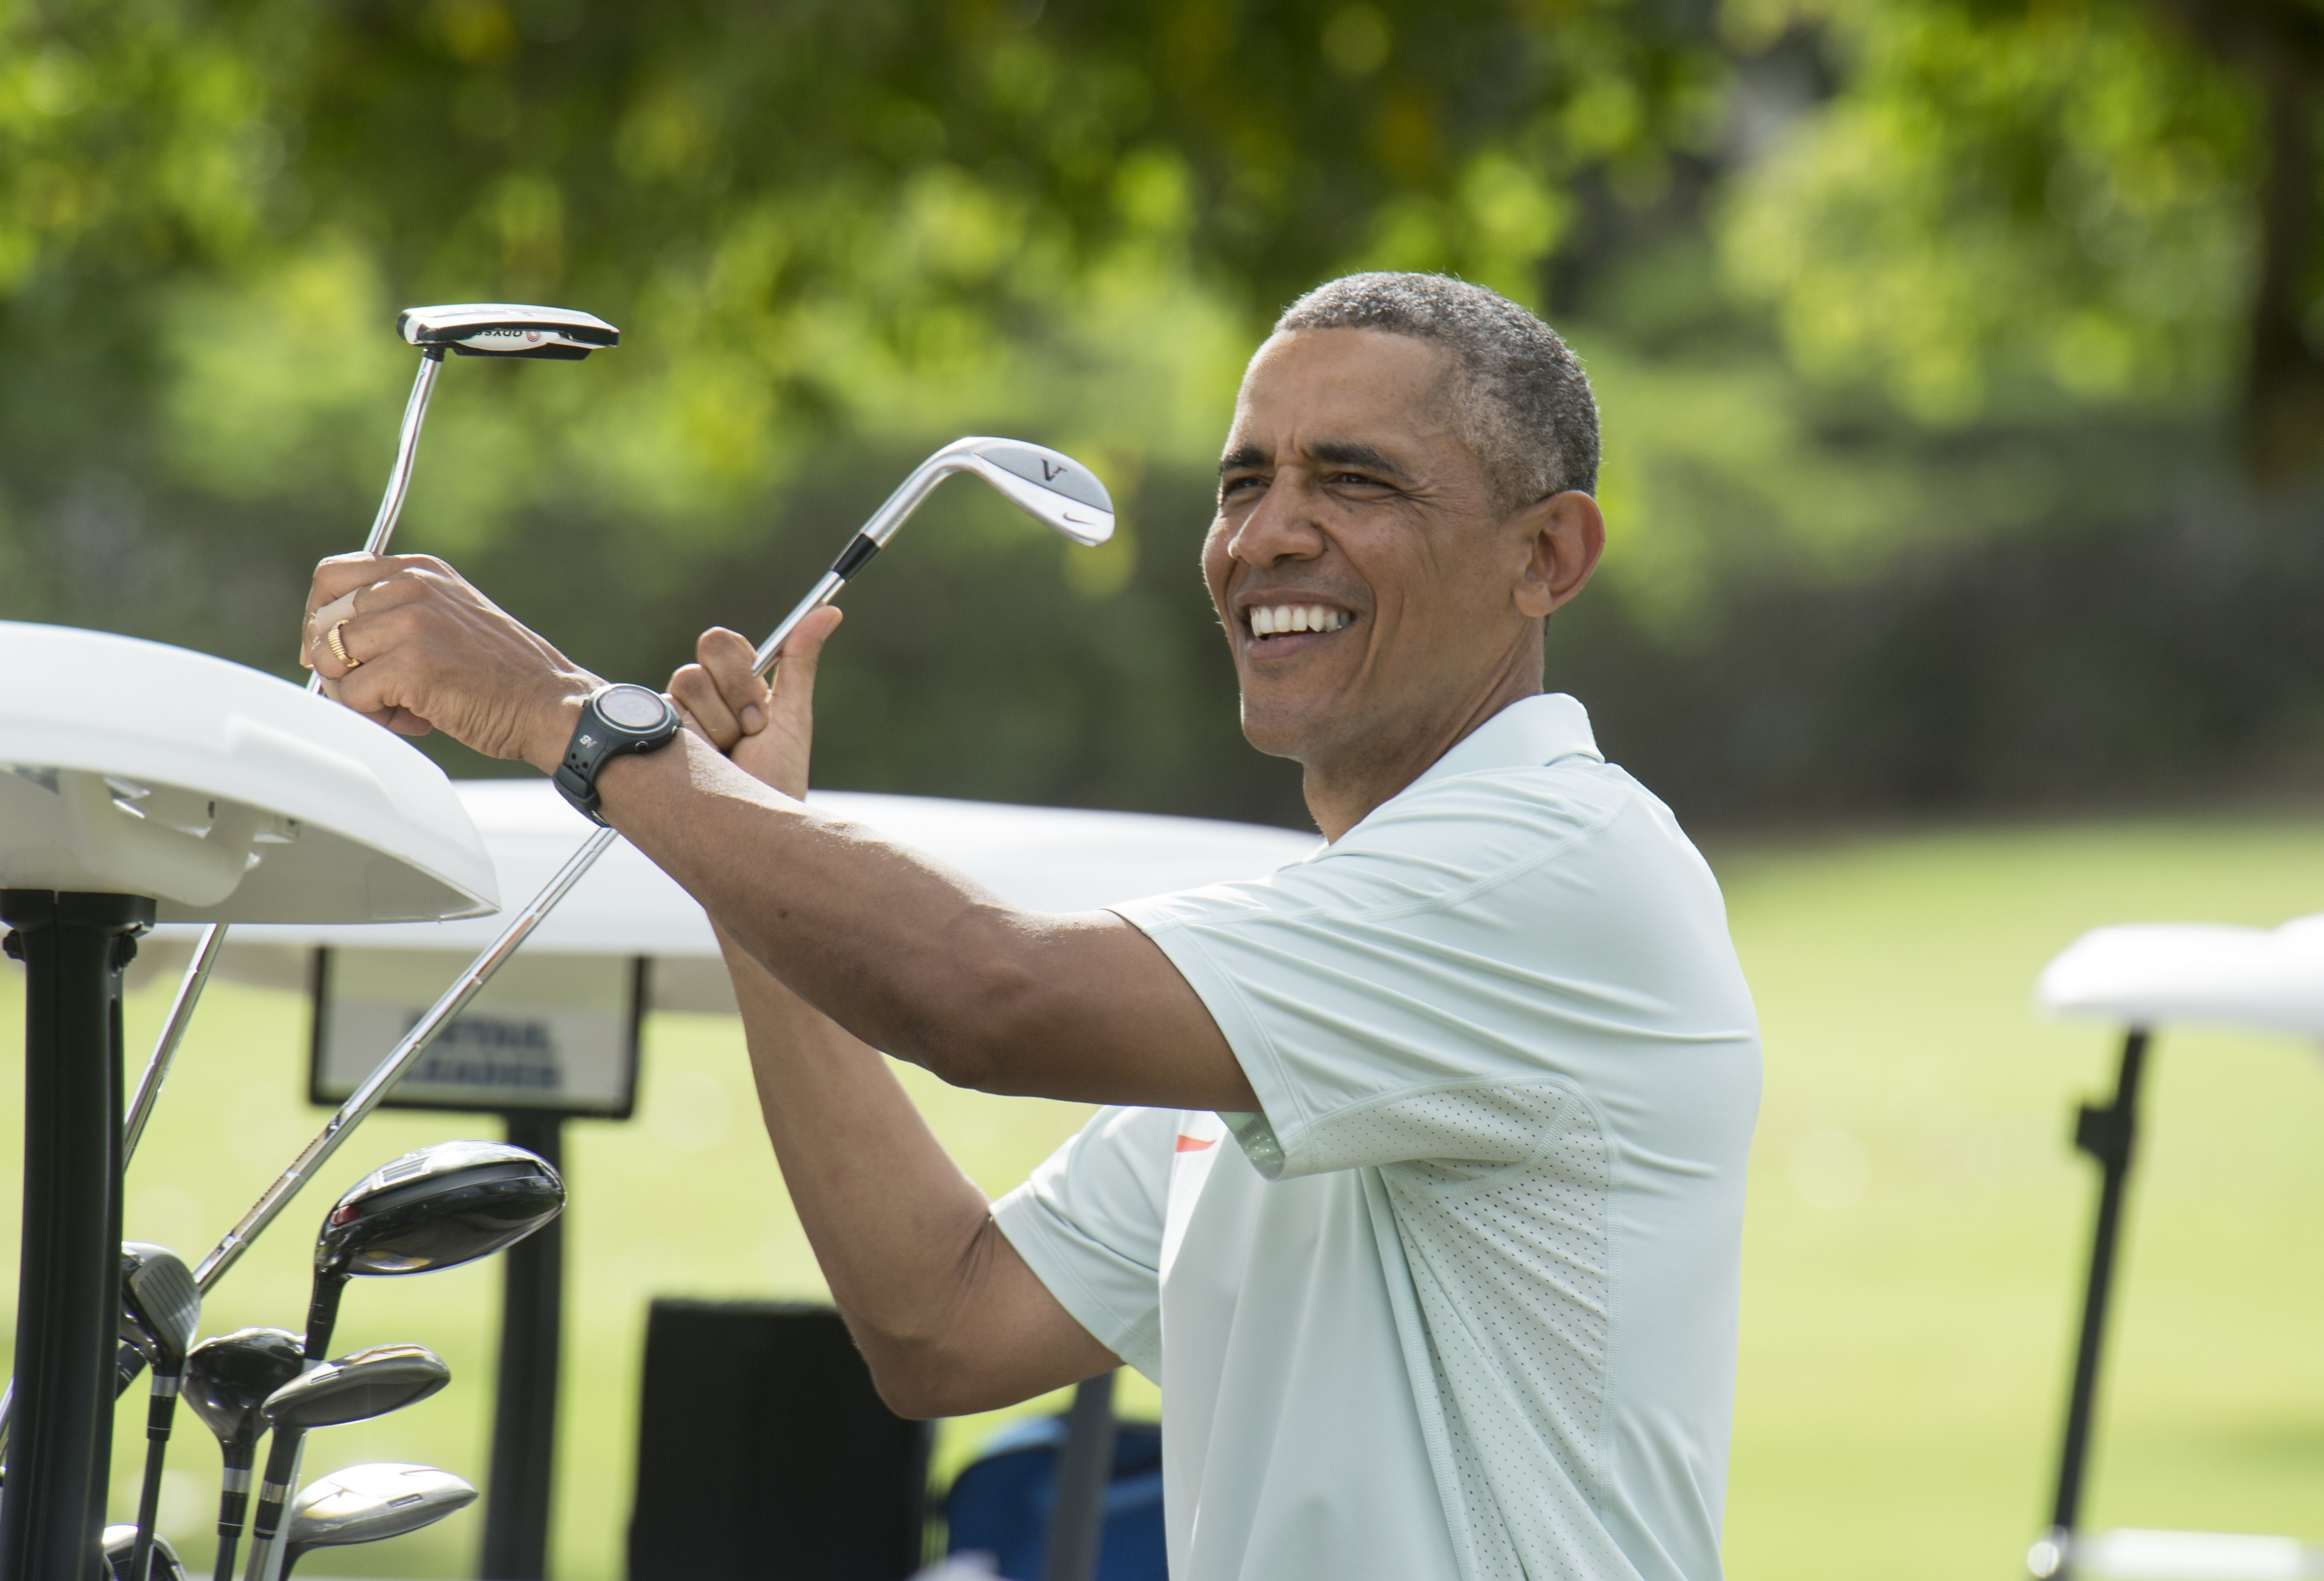 Mayor quits golf club as members try to block Barack Obama's entry